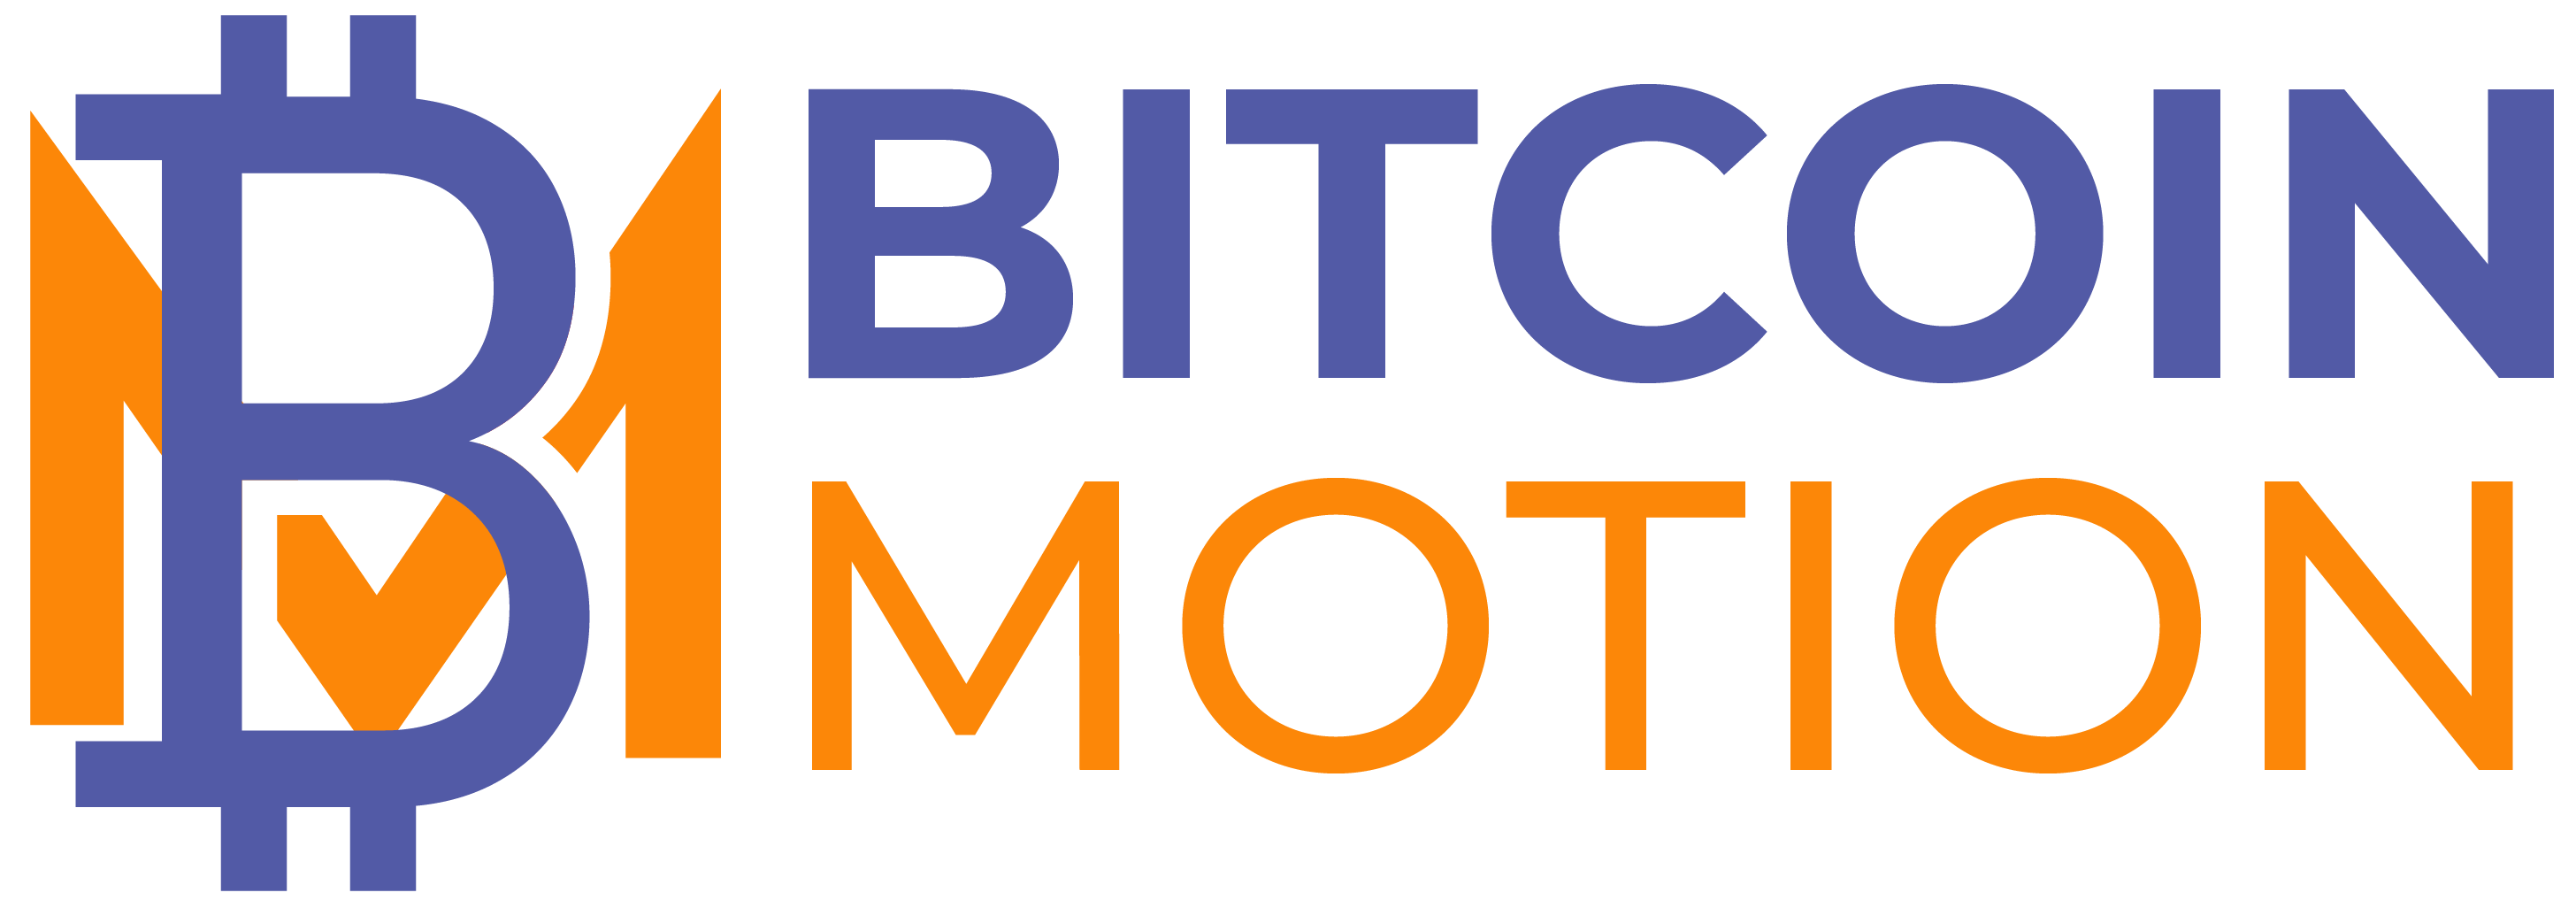 Bitcoin Motion - OPEN A FREE Bitcoin Motion ACCOUNT NOW